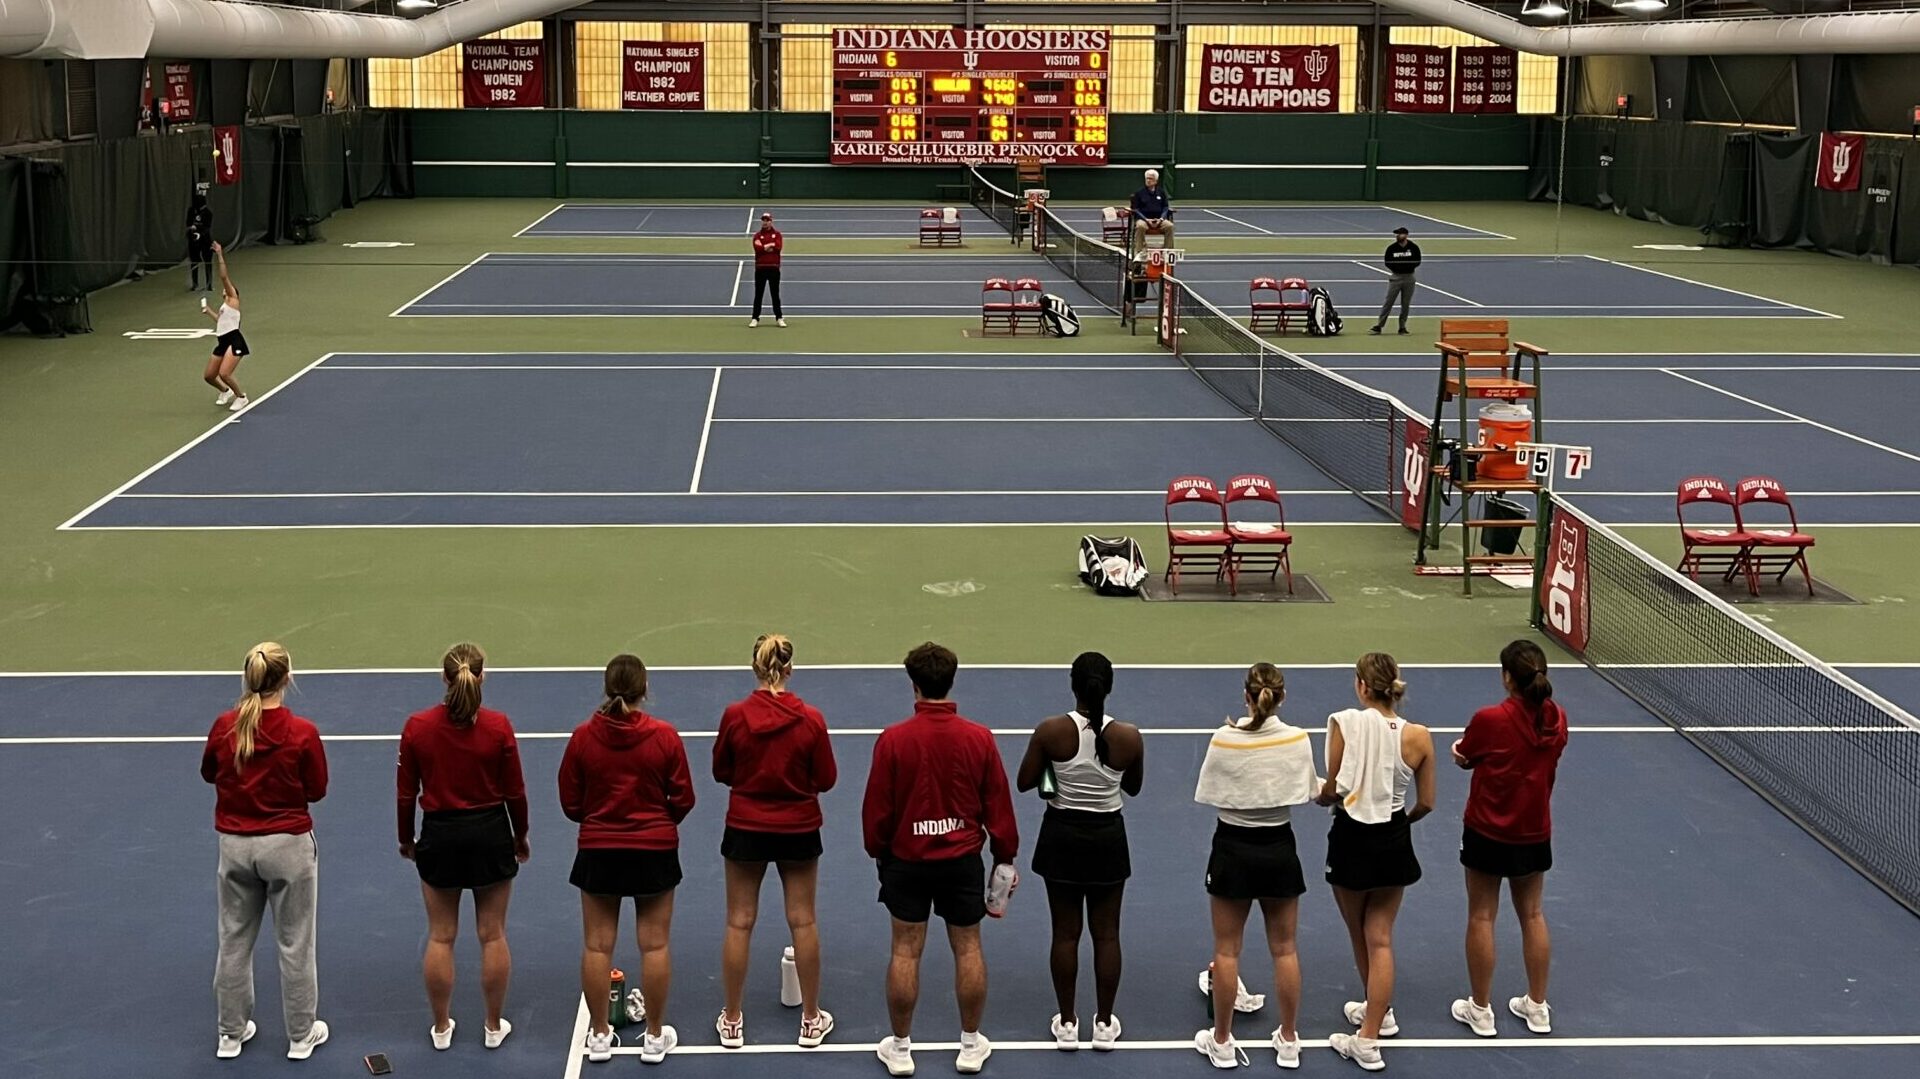 IU Women’s Tennis sweeping victory at their opening matches